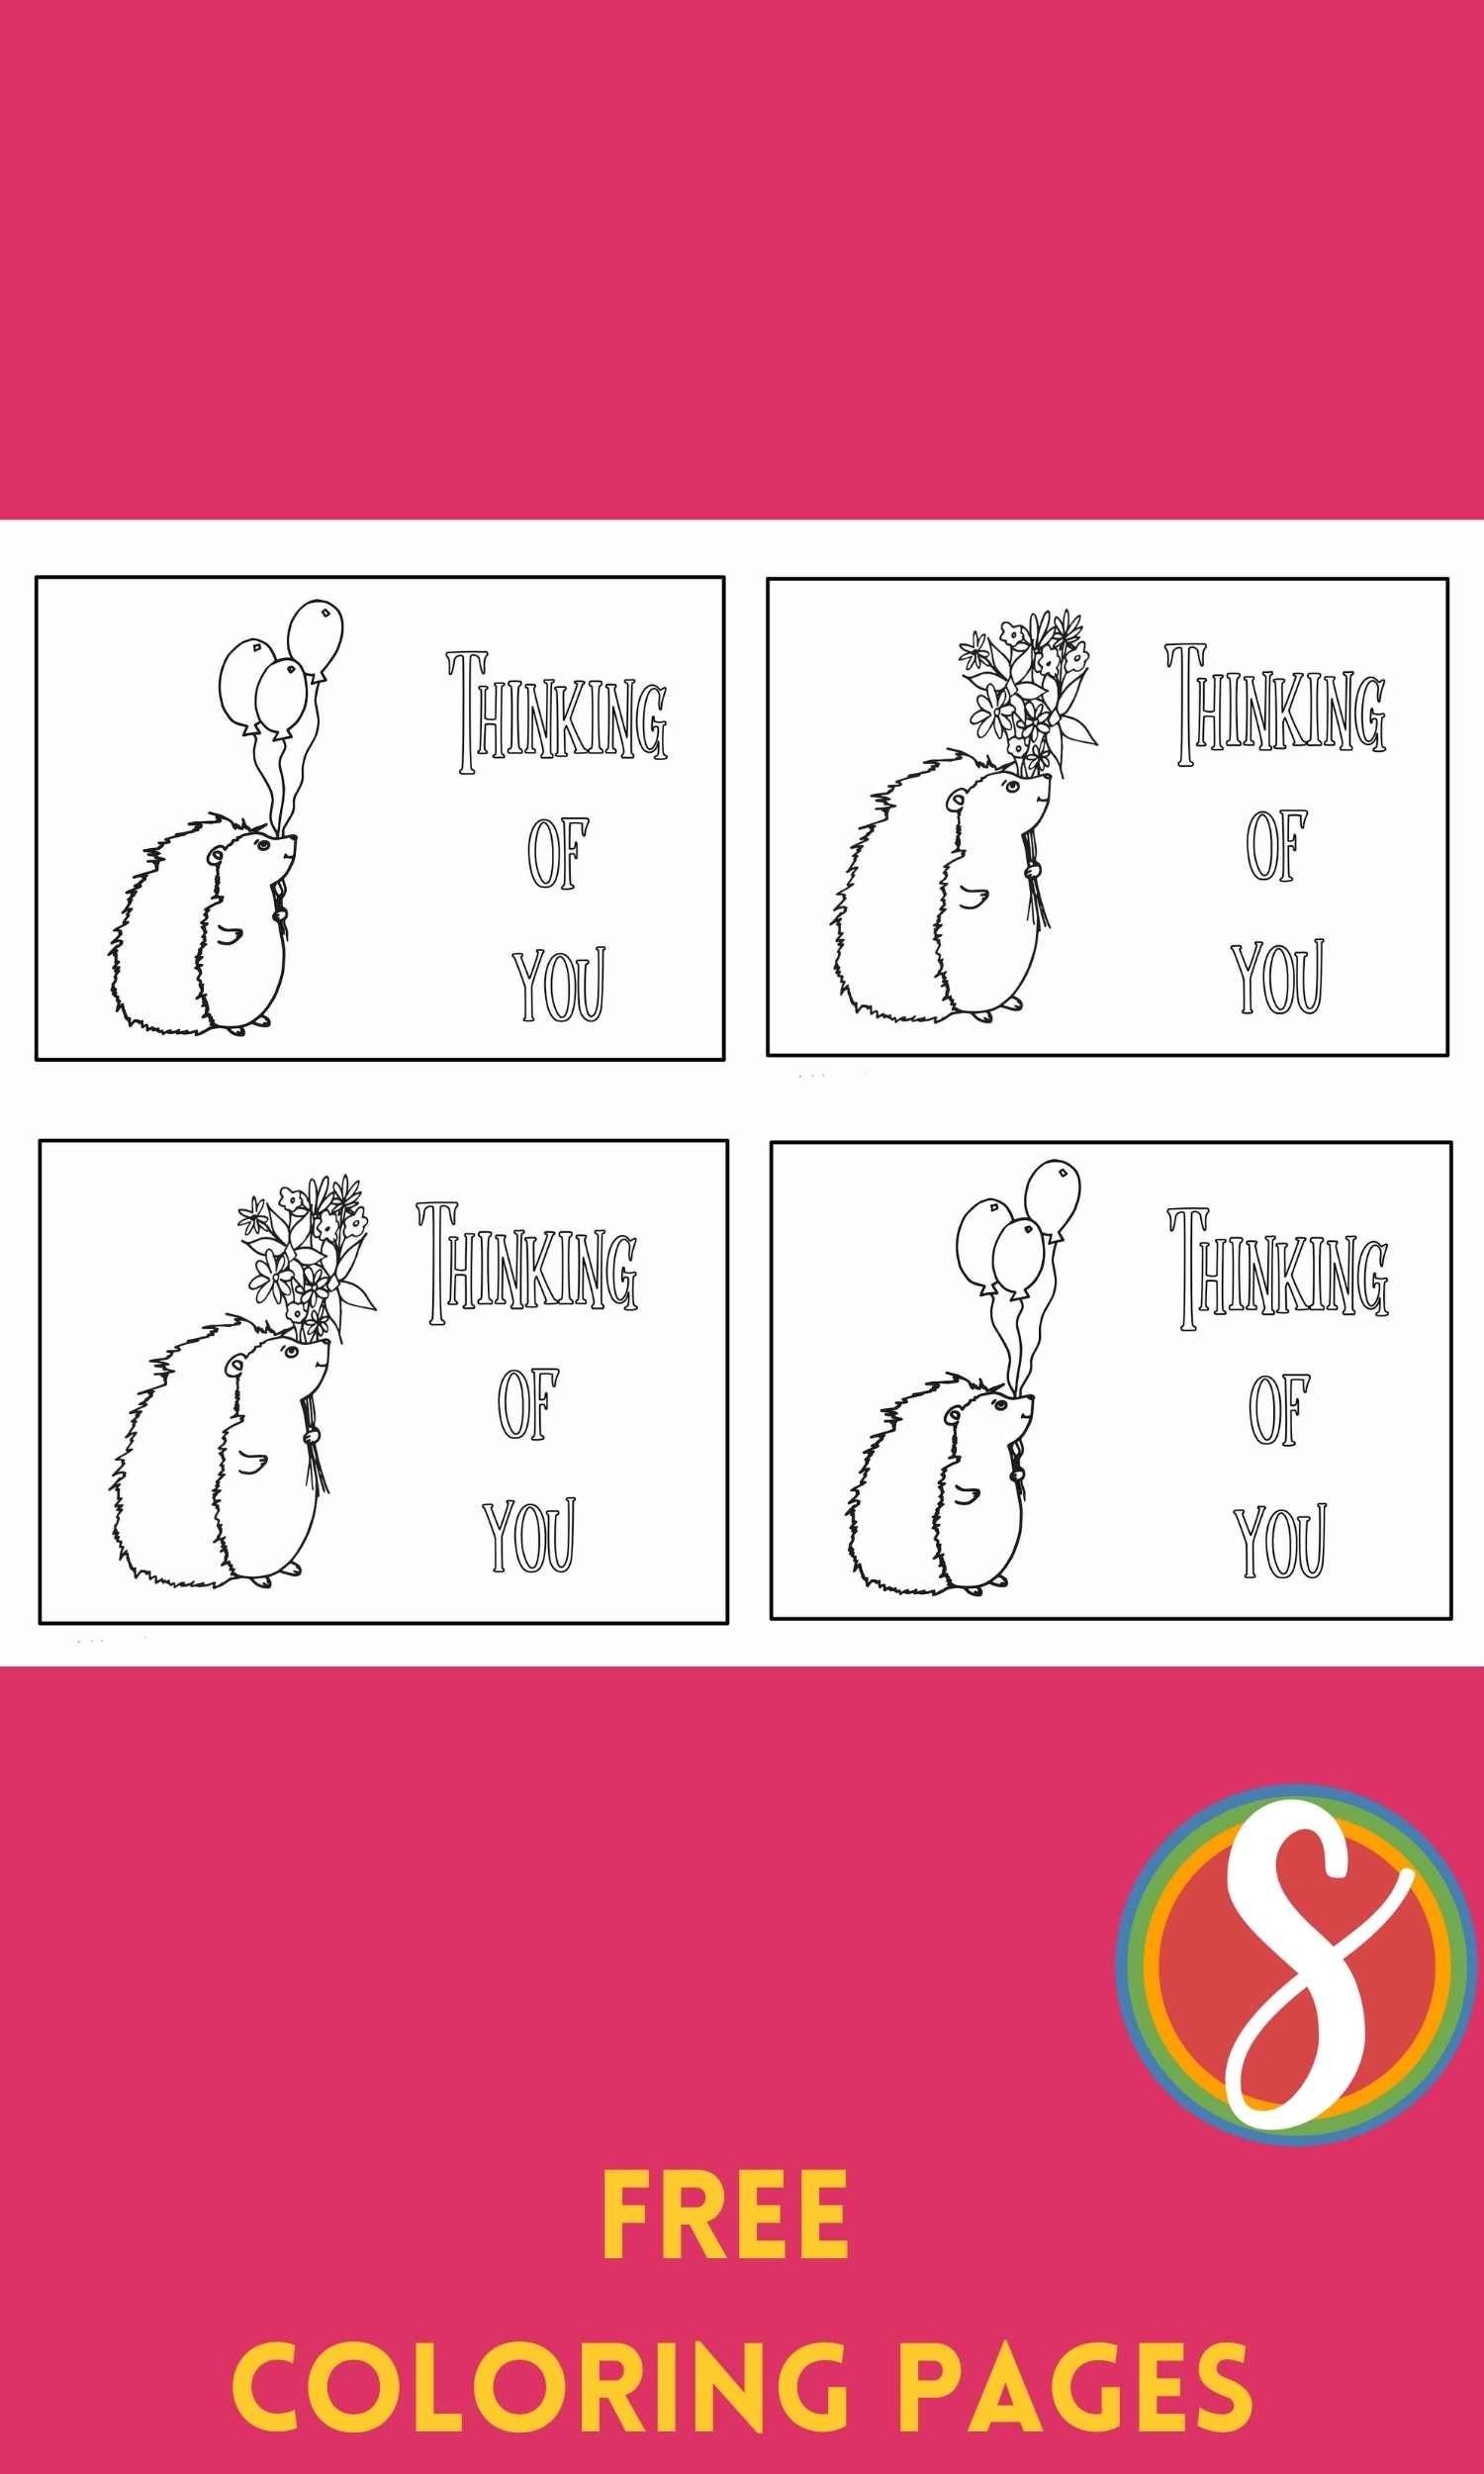 a coloring page with 4 3x5 inch cards to cut out and color with hedgehogs and "thinking of you" text